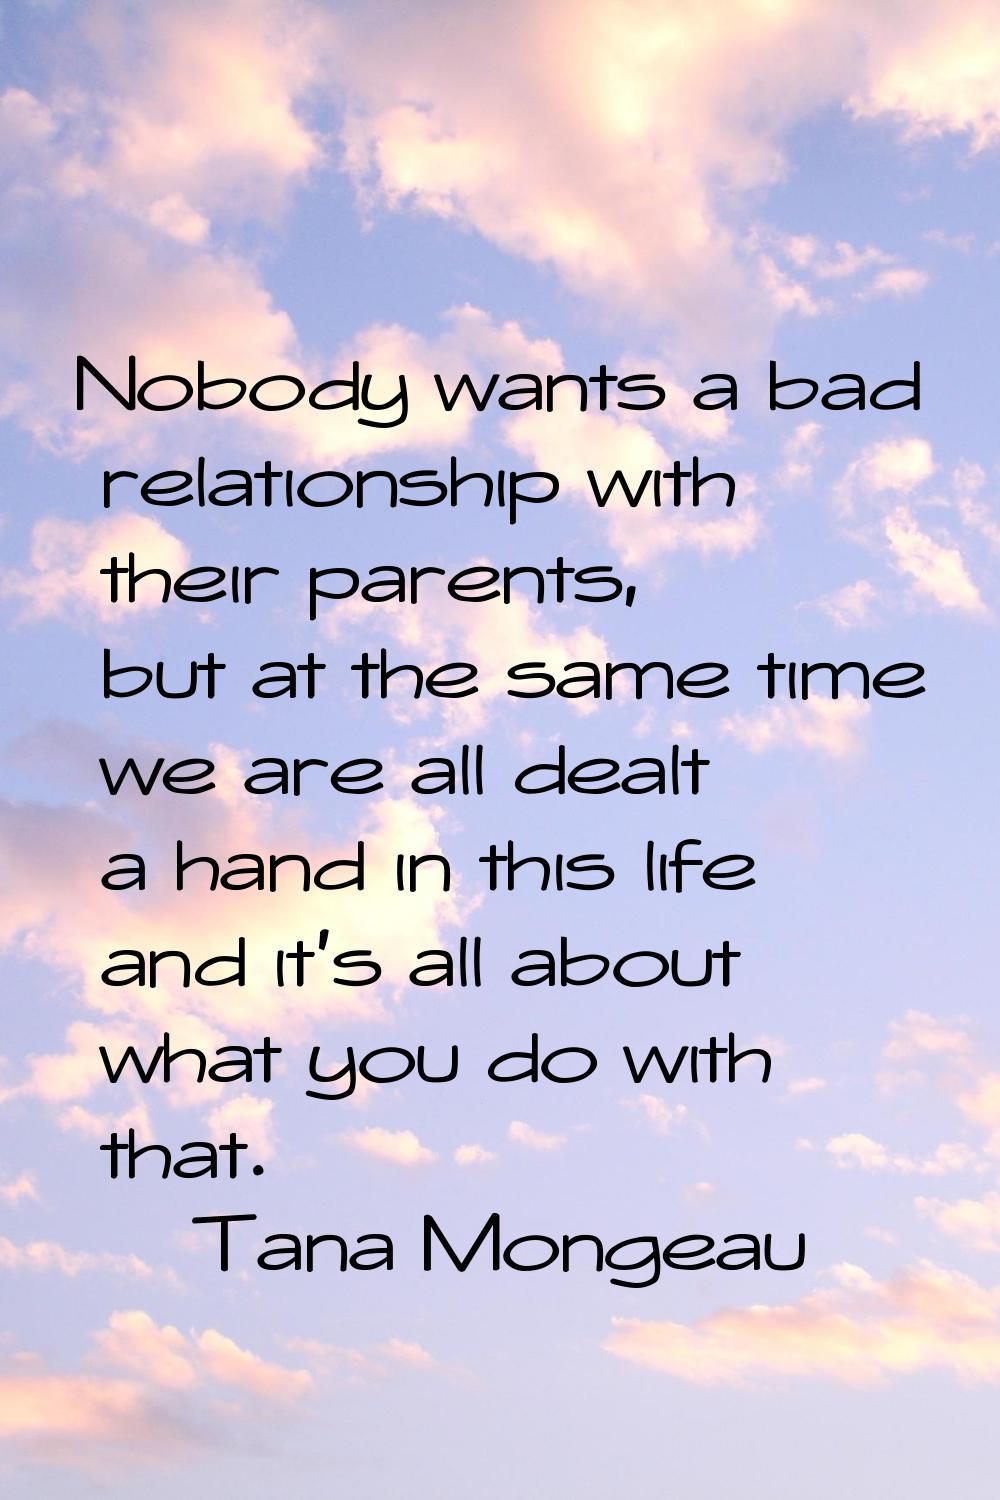 Nobody wants a bad relationship with their parents, but at the same time we are all dealt a hand in